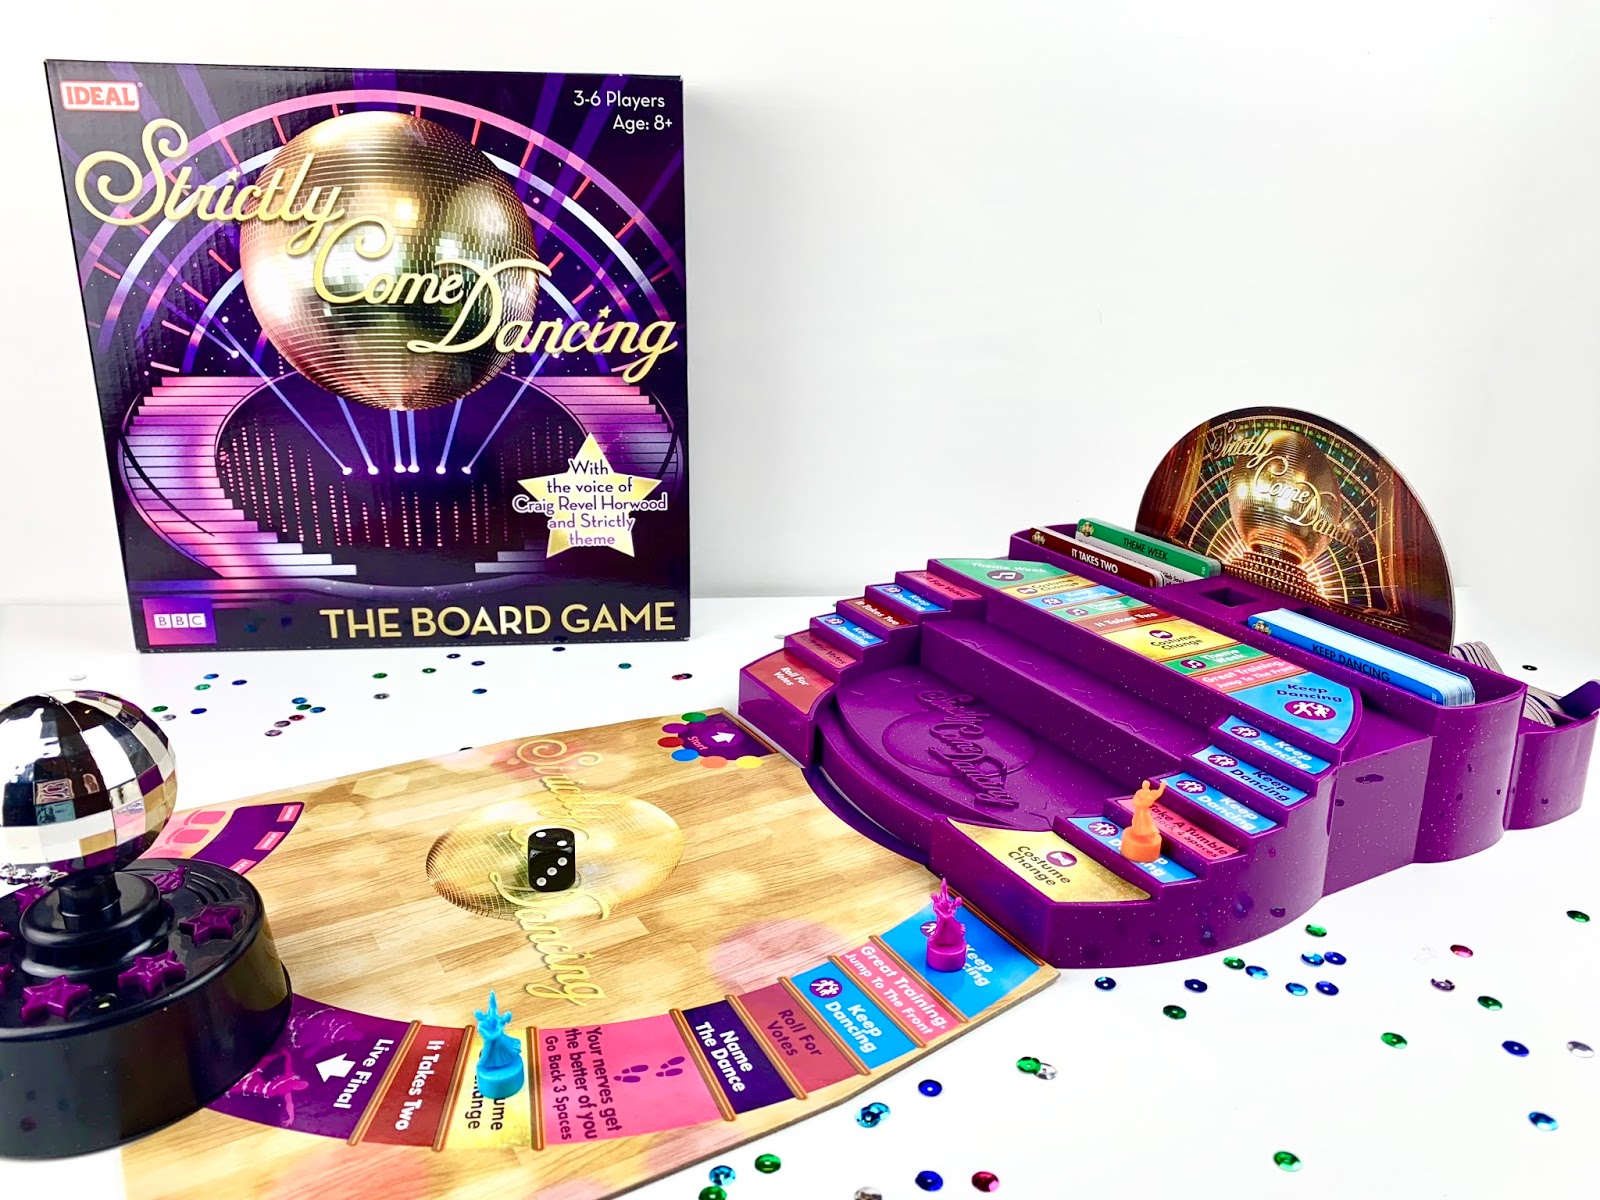 Ideal STRICTLY COME DANCING Board GAME 